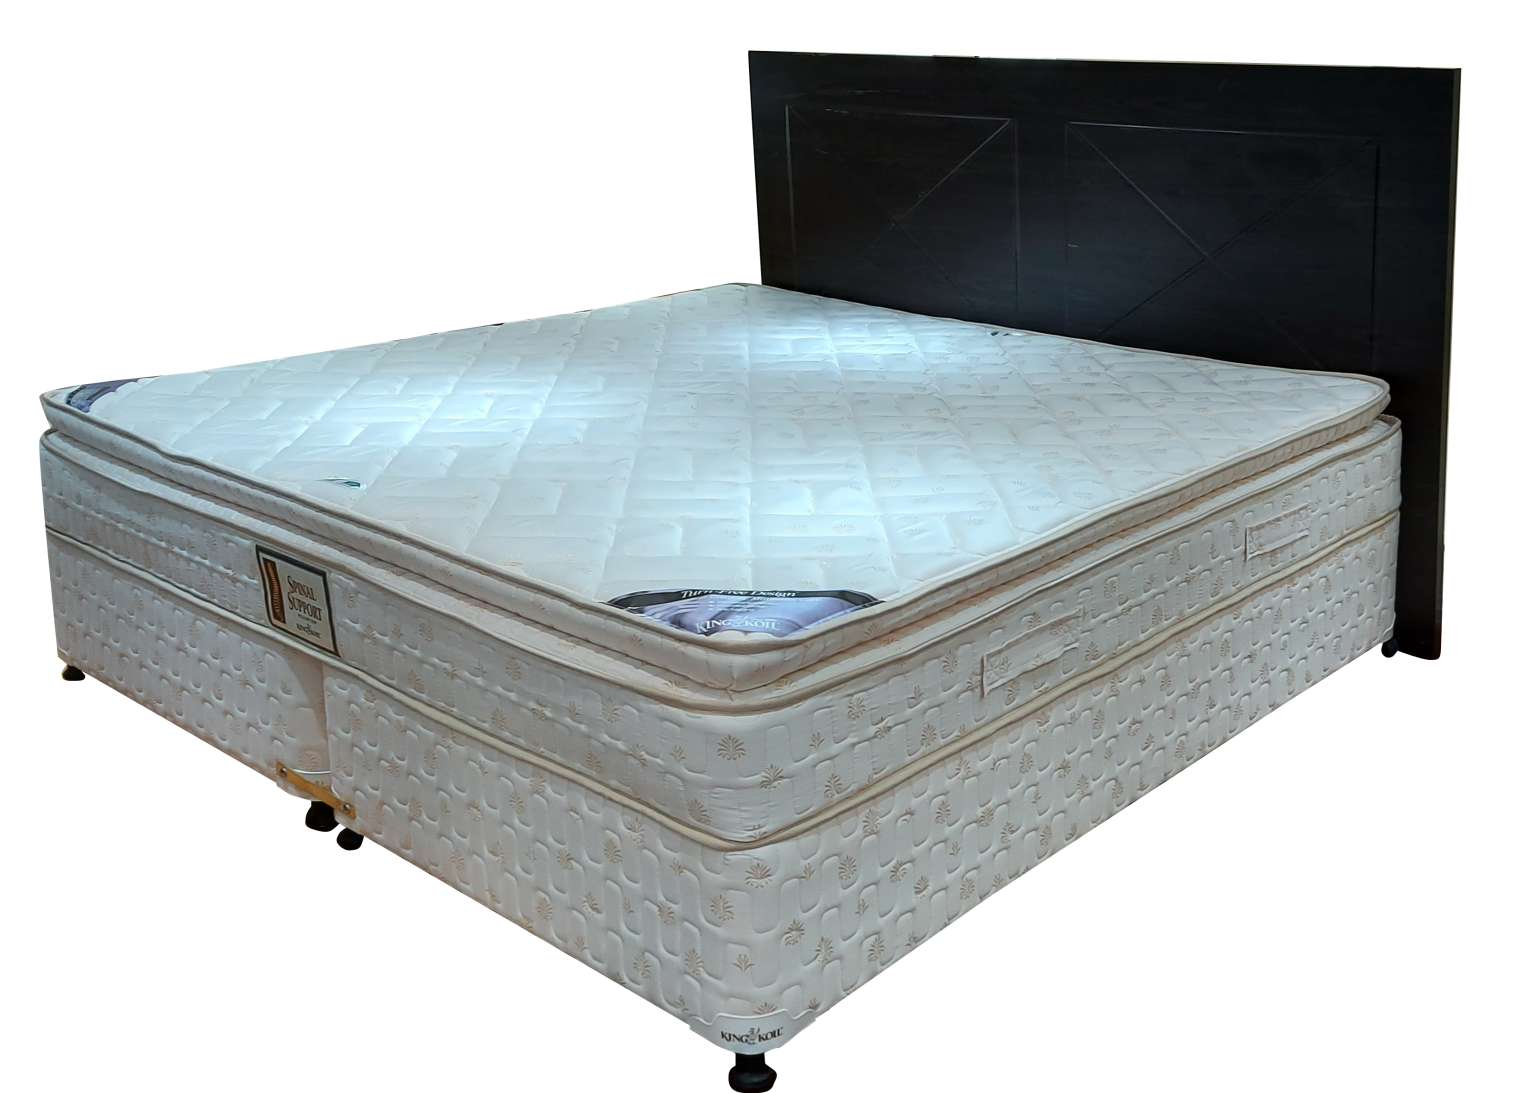 spinal support cot mattress review